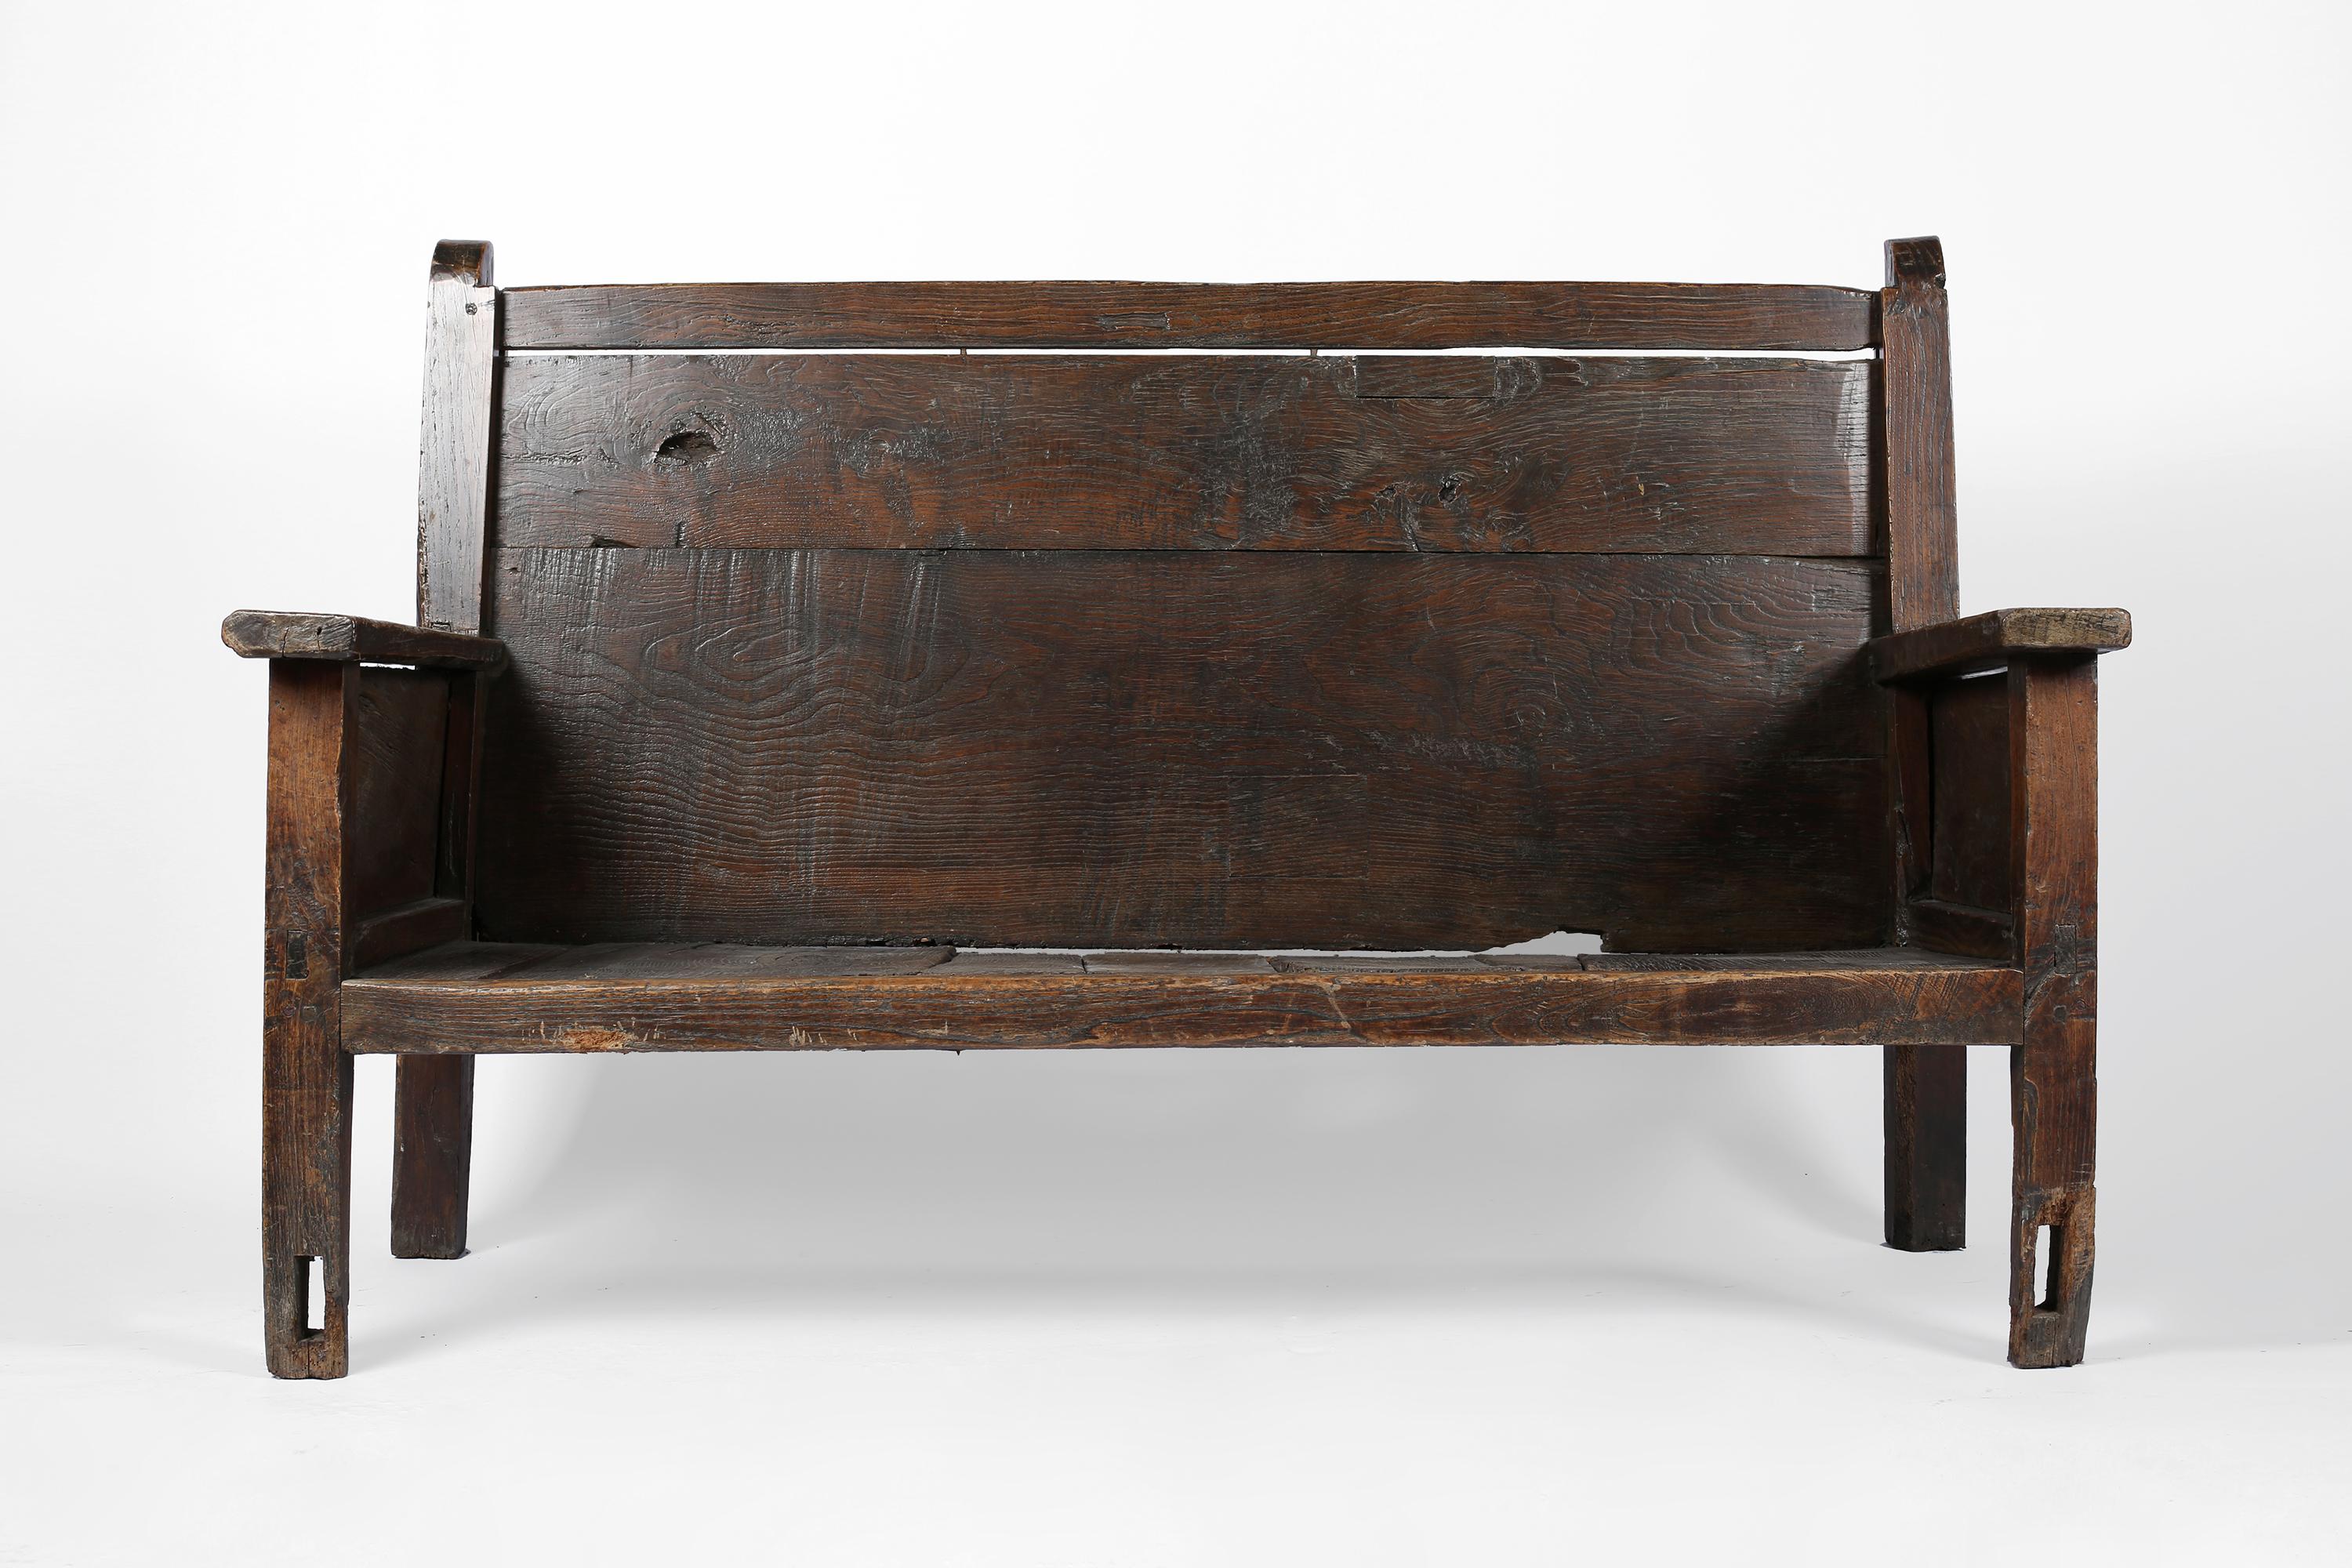 A large late 18th century bench from the Pyrenees Mountains in northern Aragon. Primitively constructed from dark, heavily patinated pine timber - a one-off piece, likely built for a rural estate. Spanish, c. 1780.